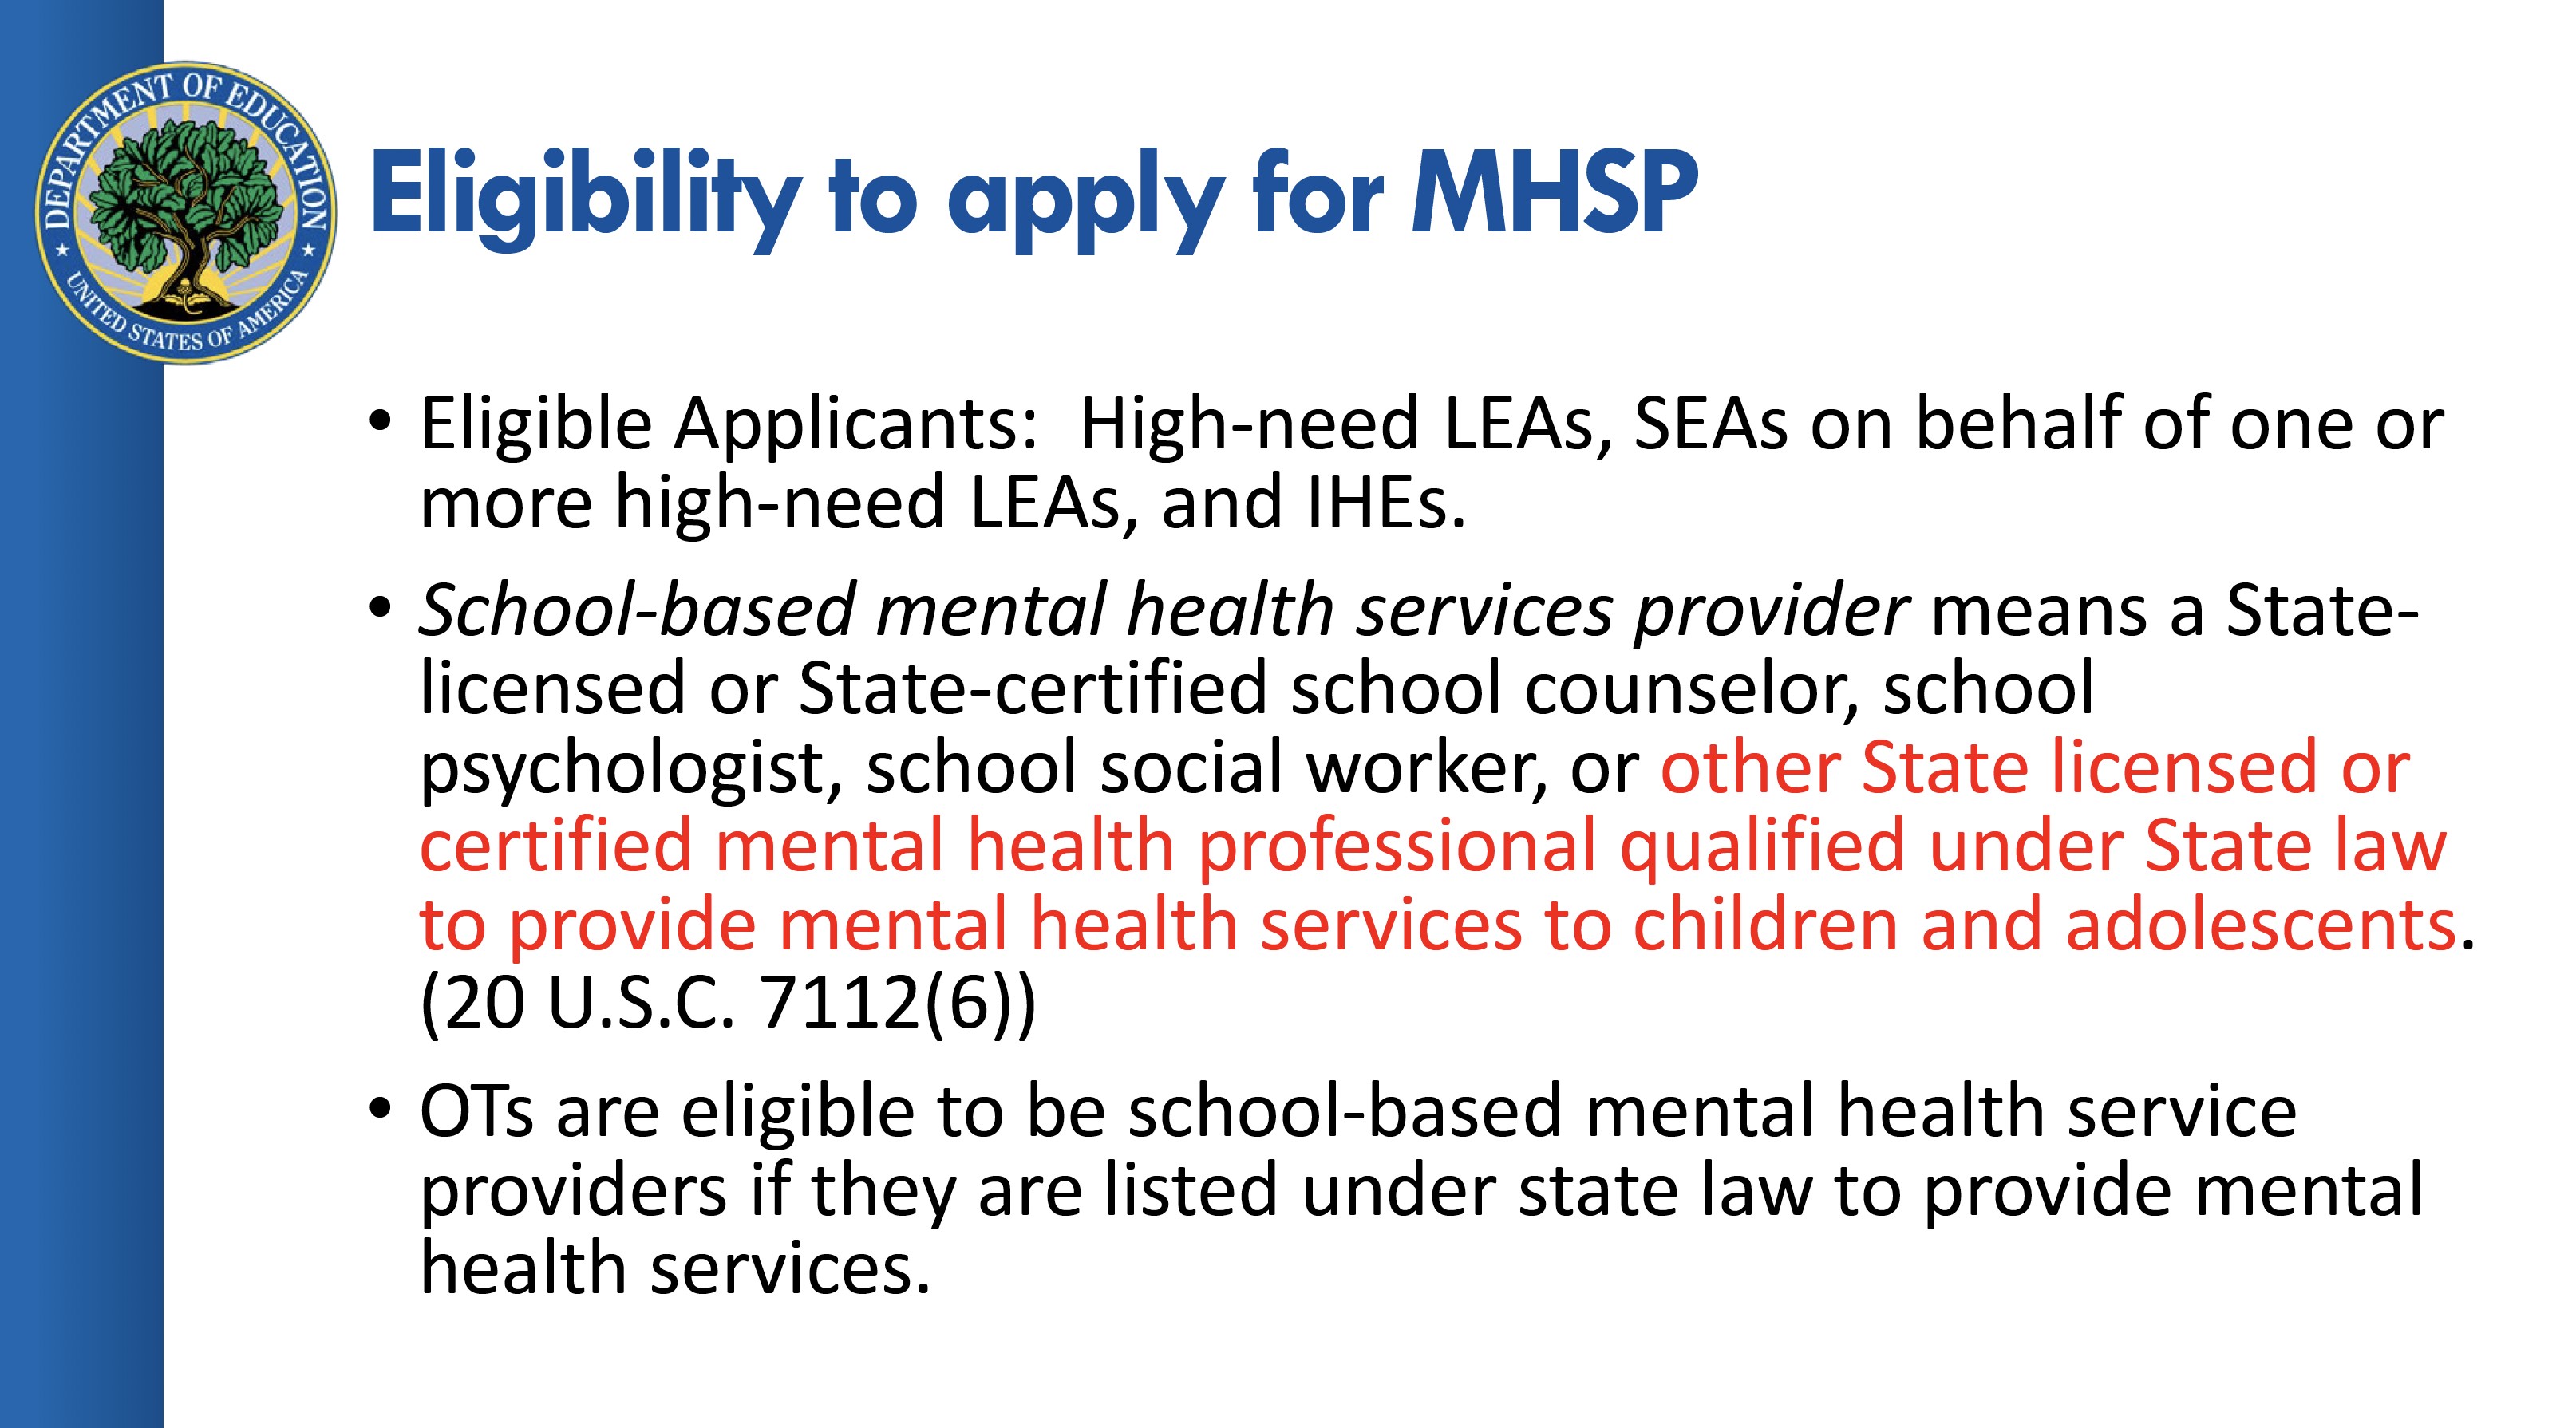 Eligibility to apply for MHSP - Elligible Applicants include High-need LEAs, SEAs on behalf of one or more high-need LEAs and IHEs. School-based mental health services provider means a State-Licensed or State-certified school counselor, school psychologist, school social worker, or (written in red to denote importance) other state licensed or certified mental health professional qualified under State law to provide mental health services to children and adolescents. (20 U.S.C. 7112(6)). OTs are eligible to be school-based mental health service providers if they are listed under state law to provide mental health services